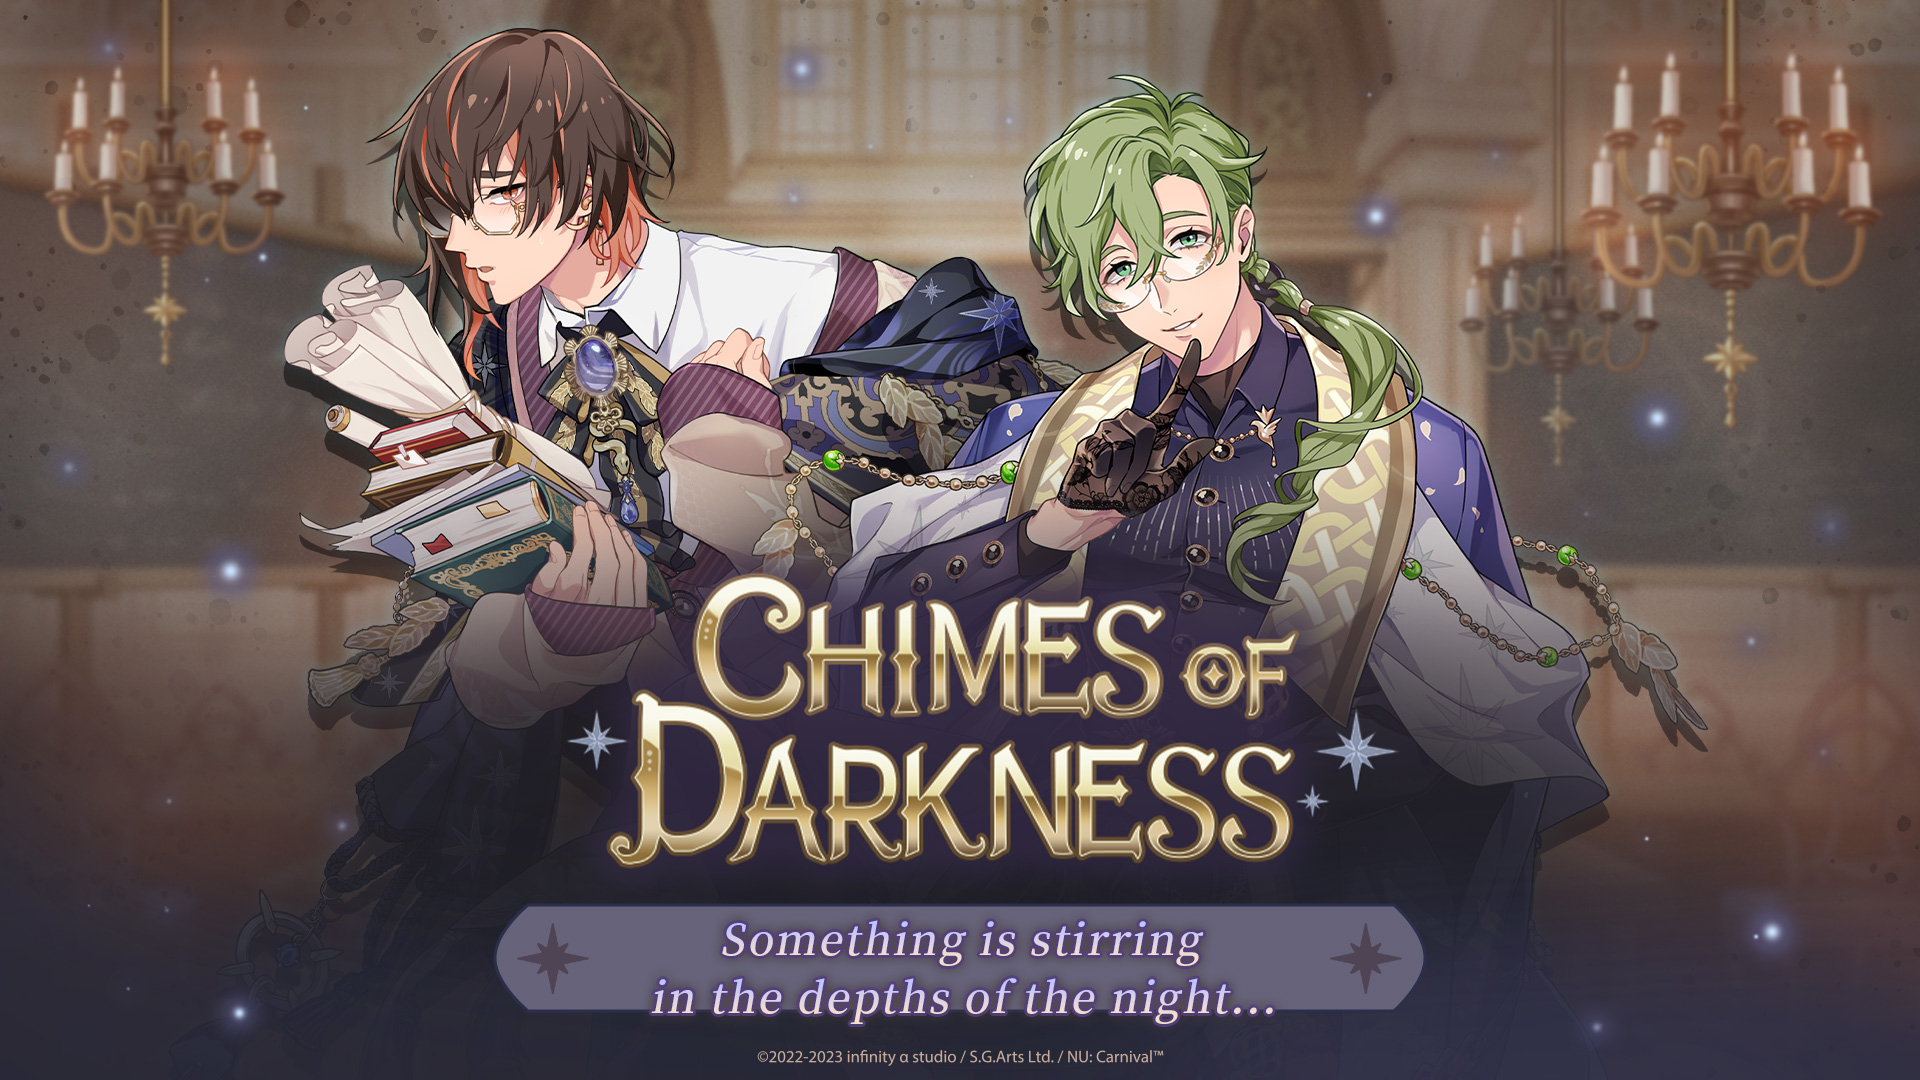 Chimes of Darkness has arrived!